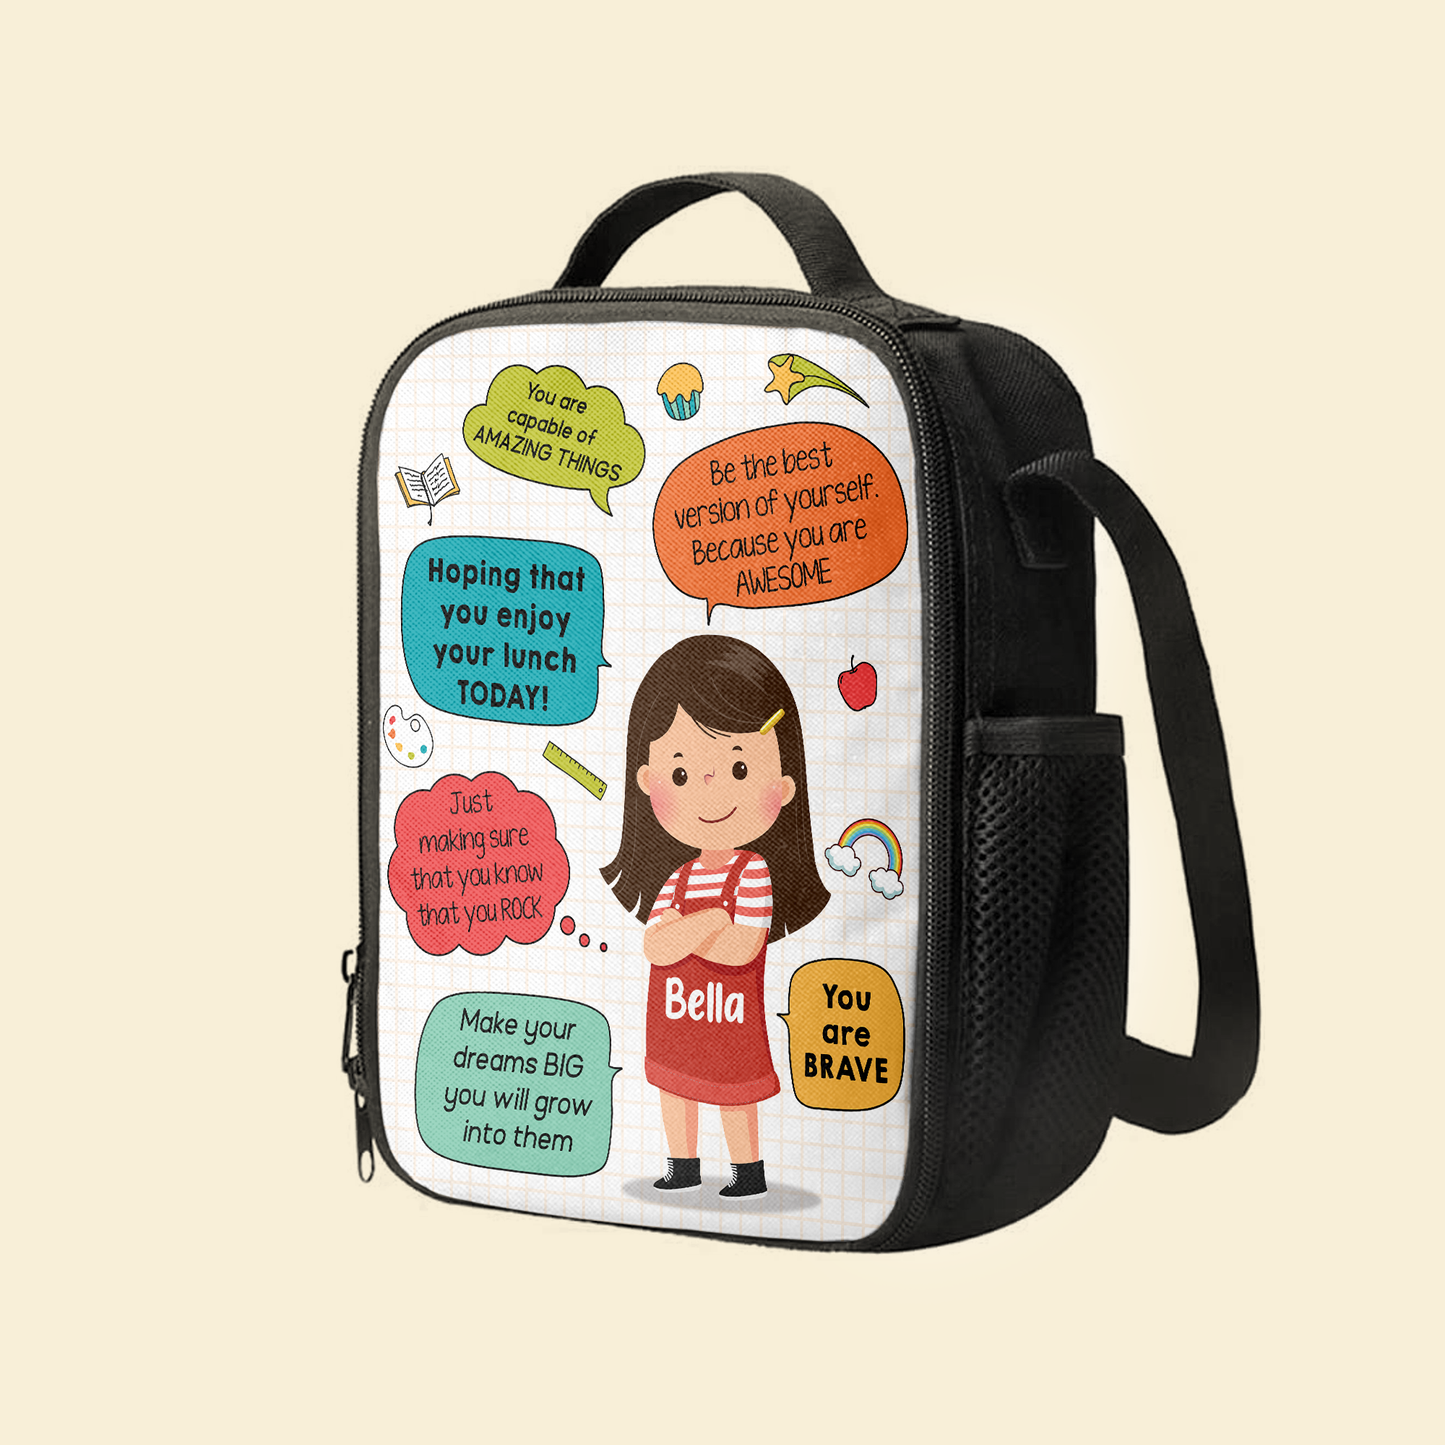 Hoping You Enjoy Your Lunch Today - Personalized Lunch Bag